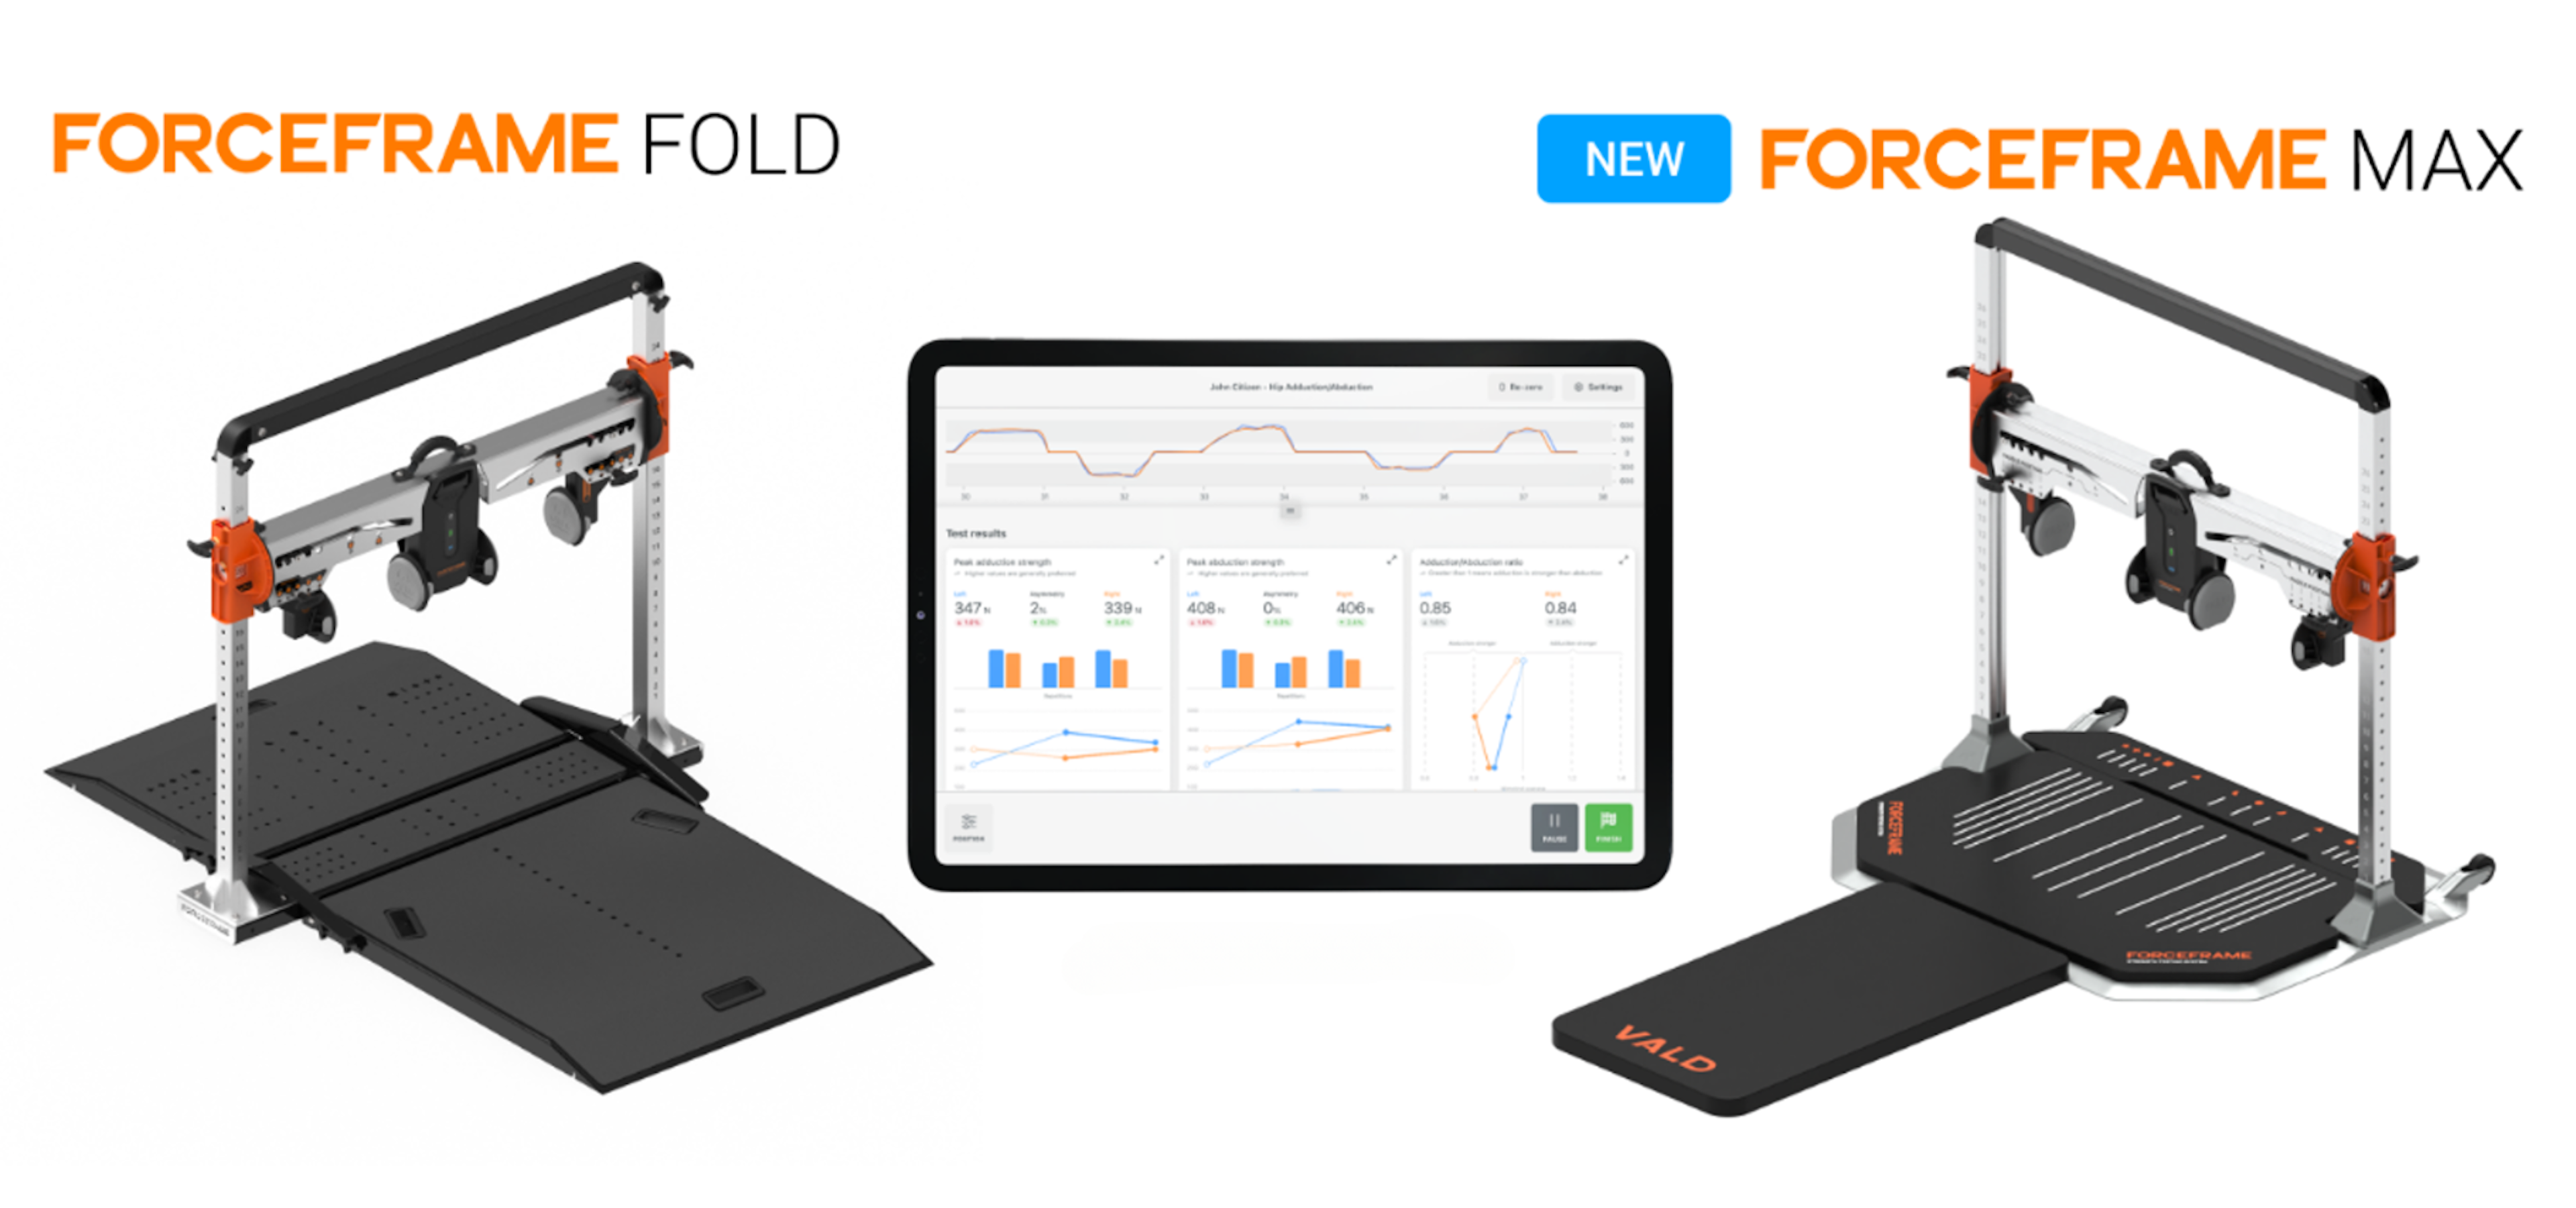 The ForceFrame range: ForceFrame Fold and the new ForceFrame Max. Both compatible with the ForceFrame app.